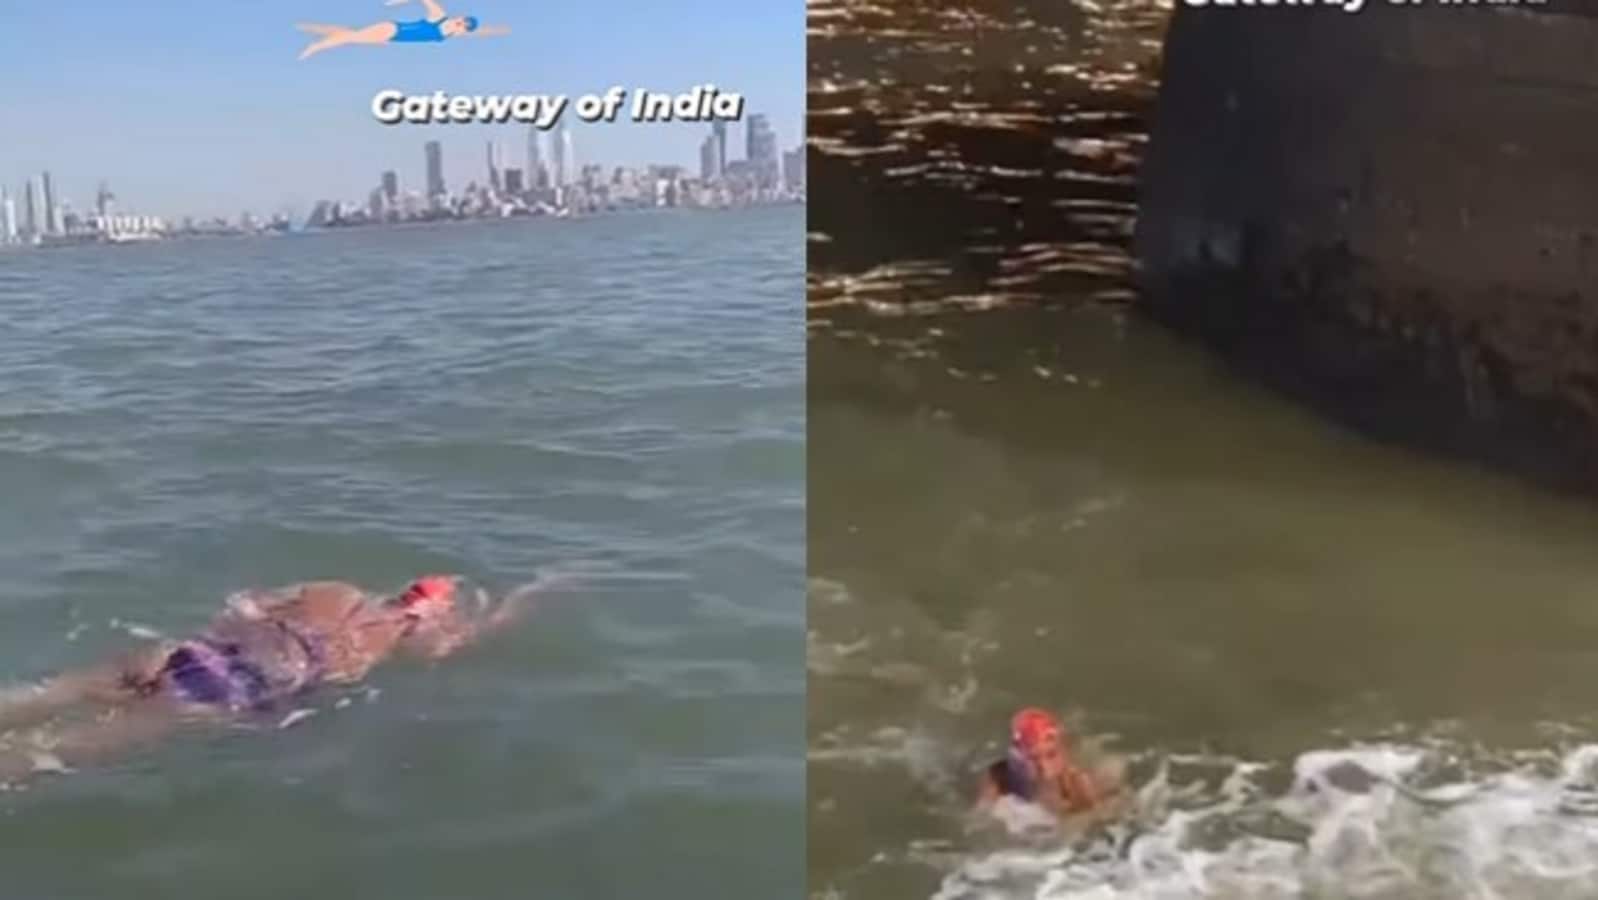 Woman swims 36 km from Worli Sea Link to Gateway of India. Watch